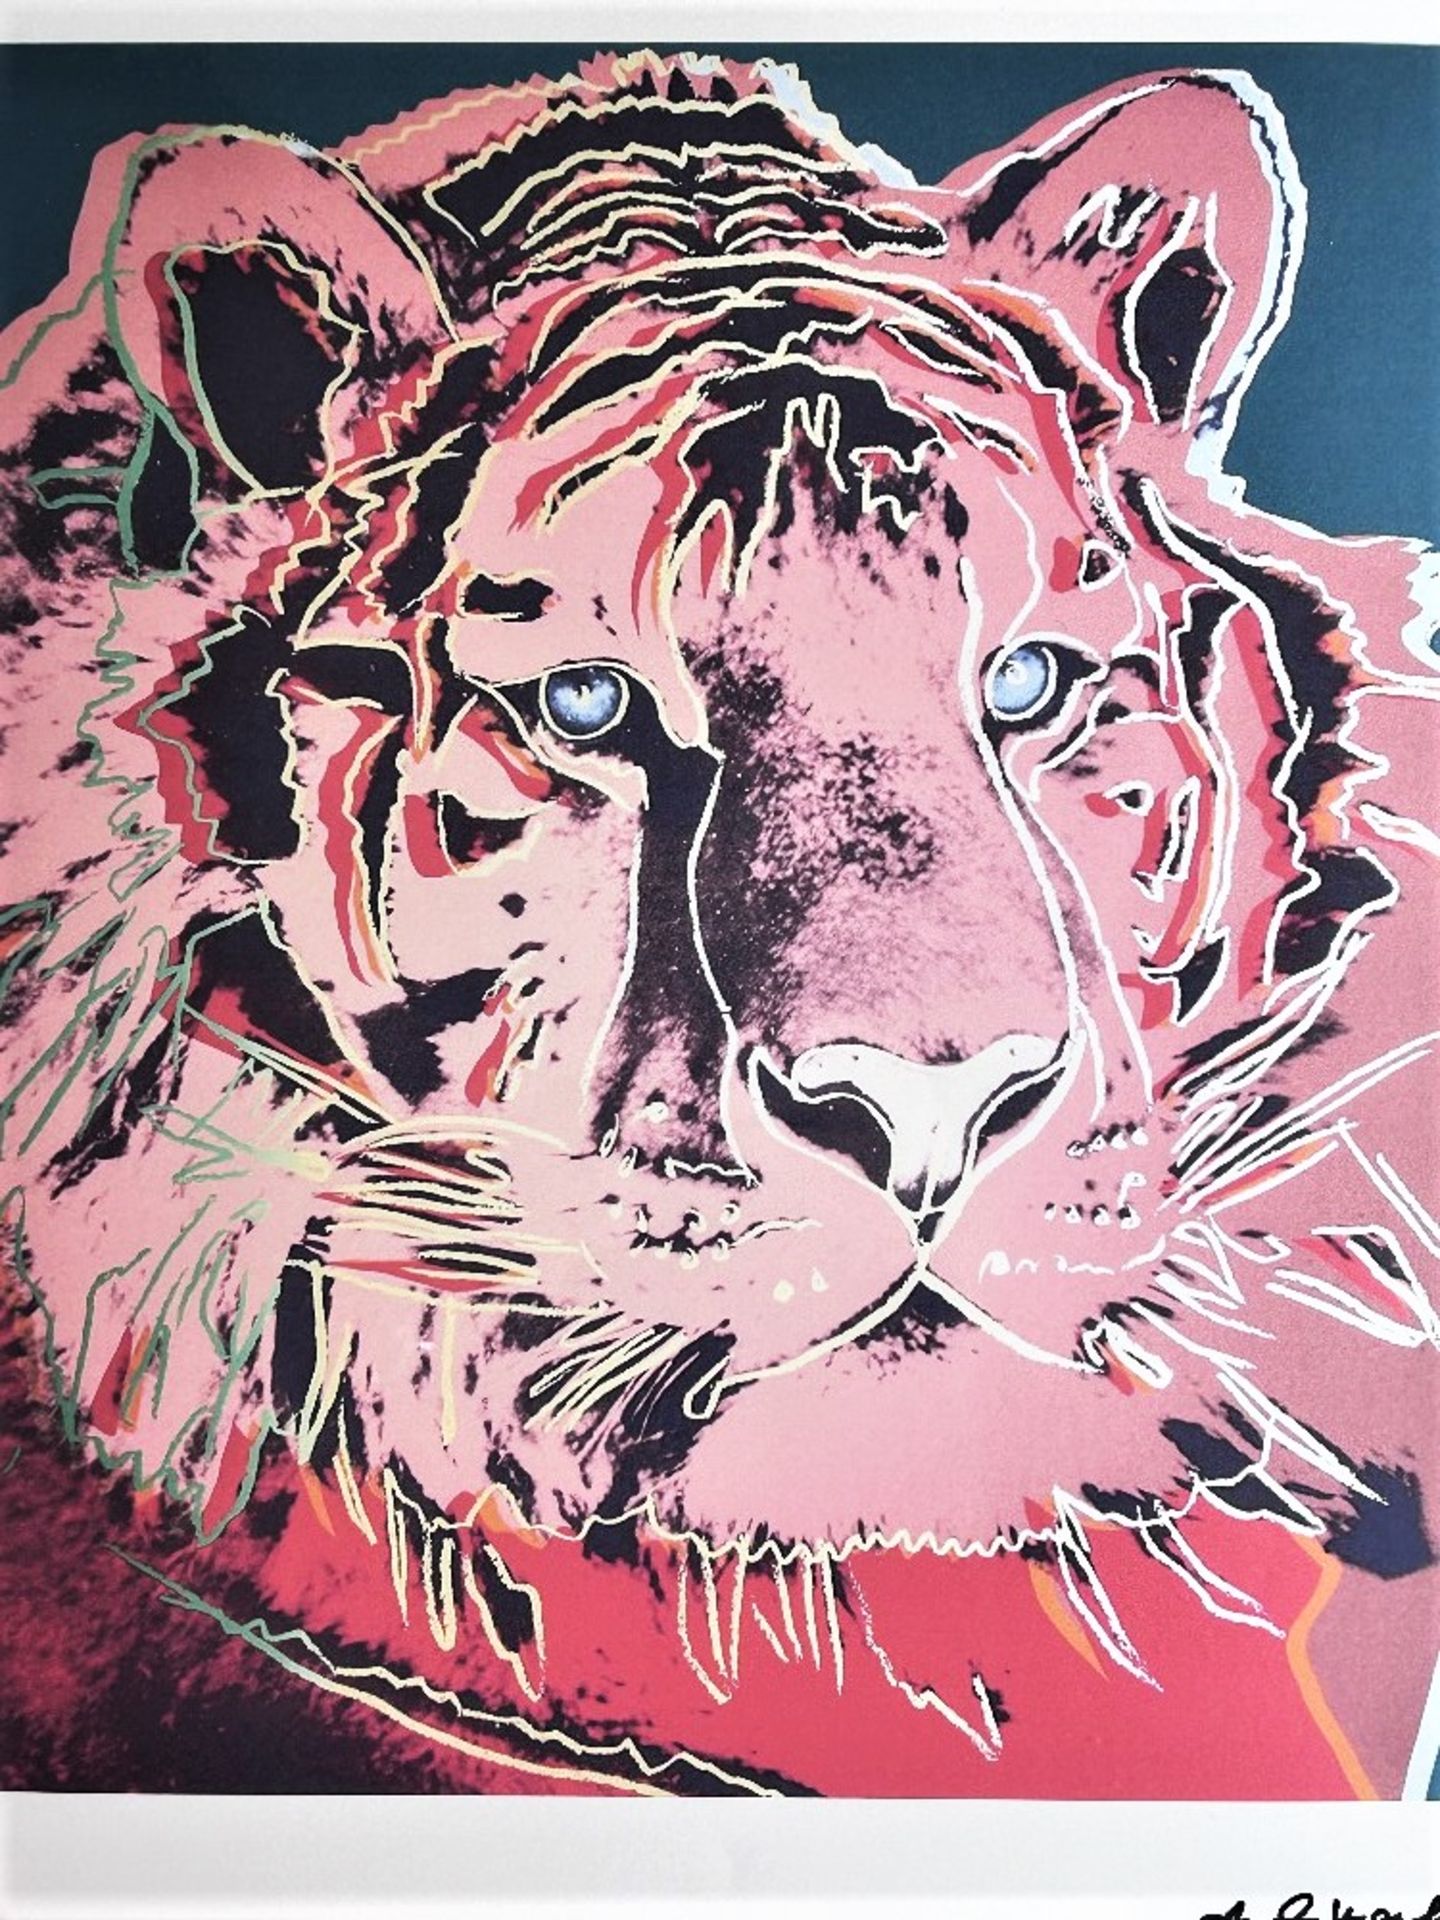 Andy Warhol-(1928-1987) "Endangered Species Tiger" Lithograph - Image 3 of 8